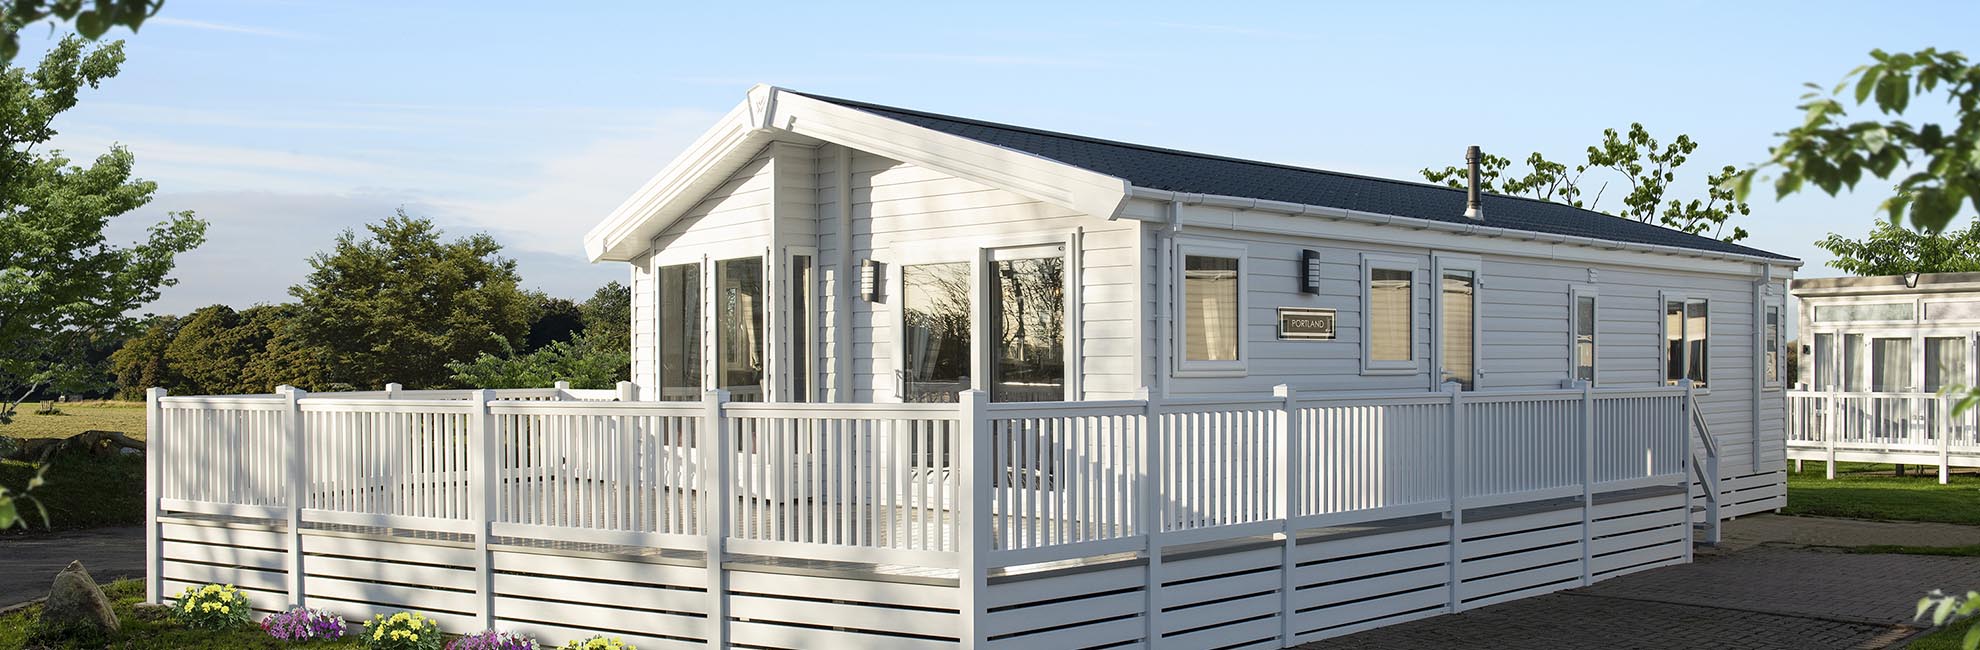 Exterior of a Willerby Portland lodge